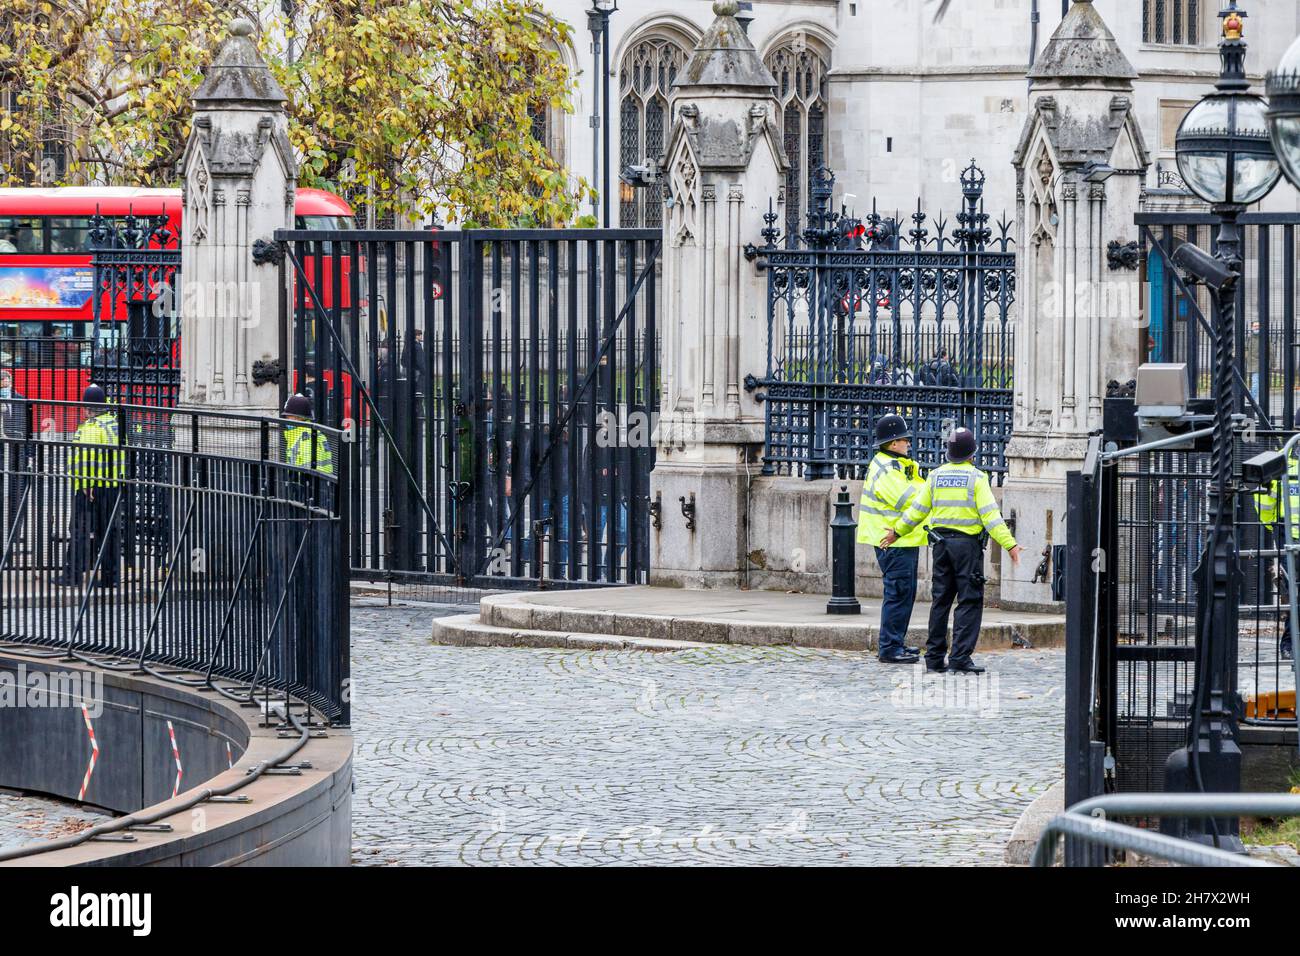 Police and security measures inside the grounds of the Palace of Westminster (Houses of Parliament), London, UK Stock Photo